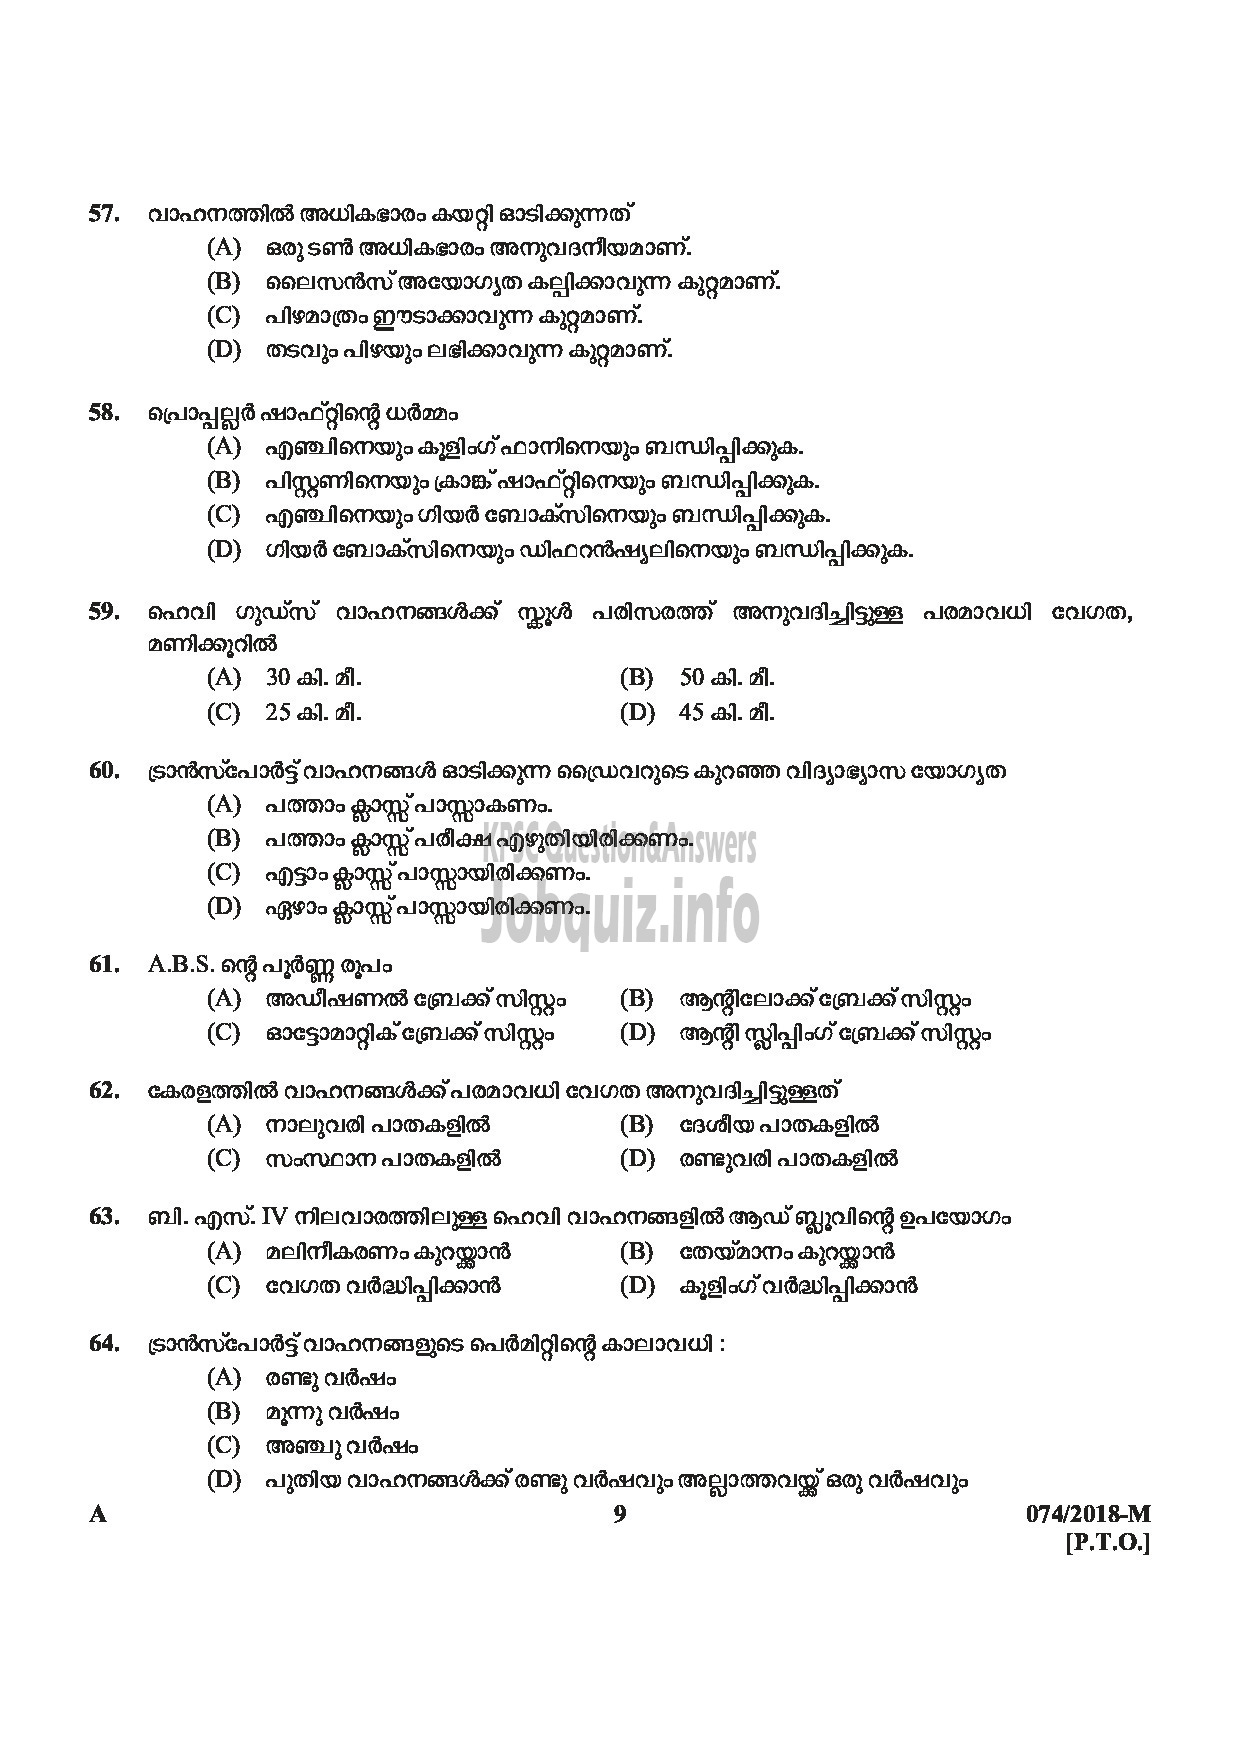 Kerala PSC Question Paper - POLICE CONSTABLE DRIVER ARMED POLICE BATTALION POLICE-9